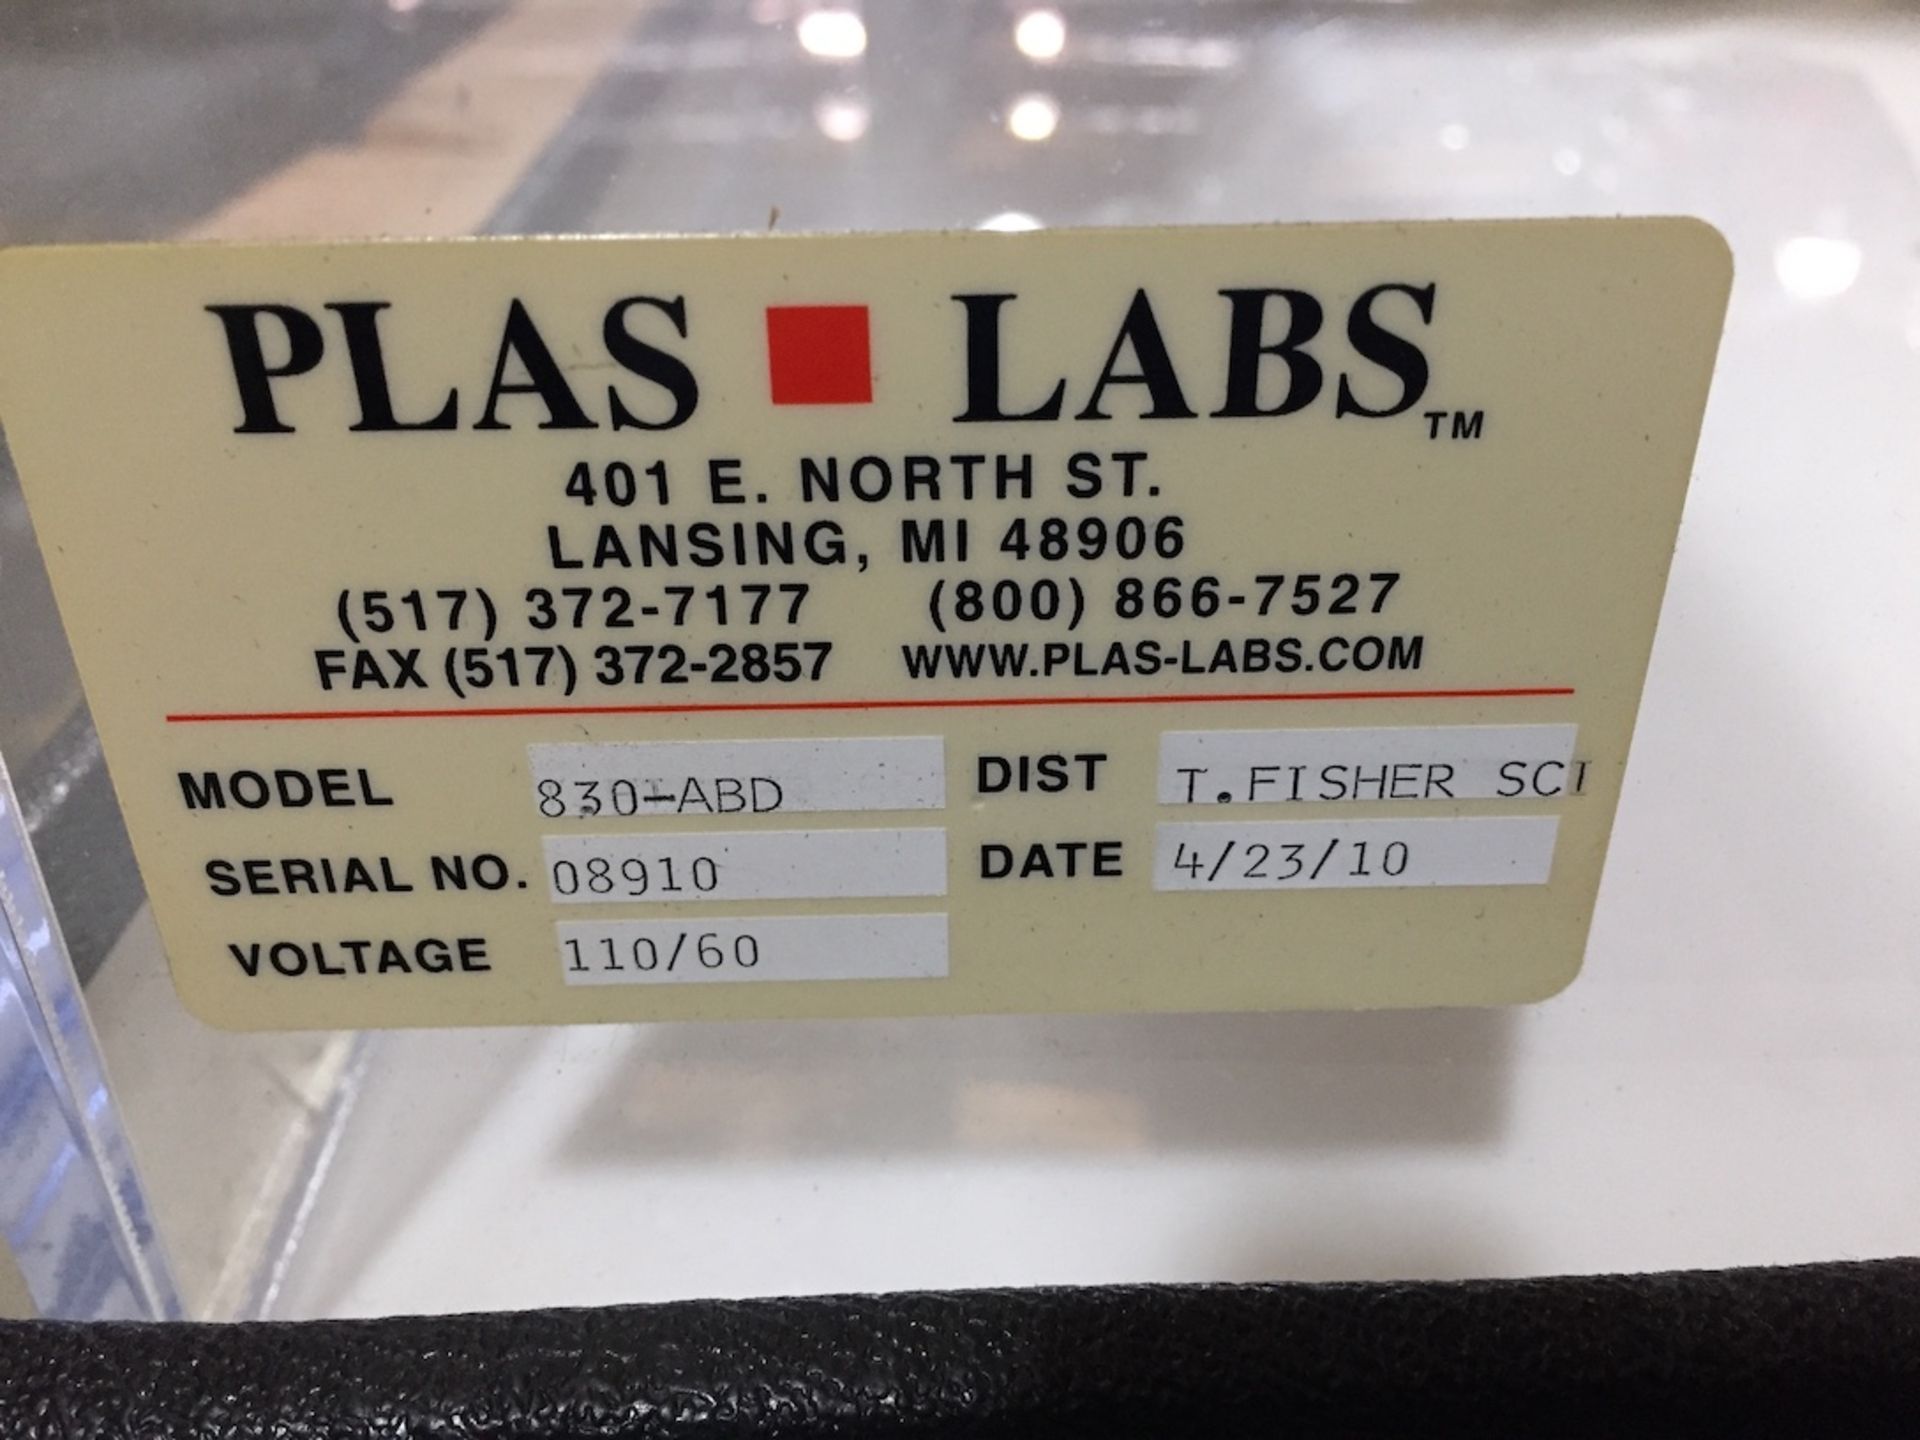 Plas-Labs Model 830-ABD 3-Glove Isloation Chamber - Image 2 of 3